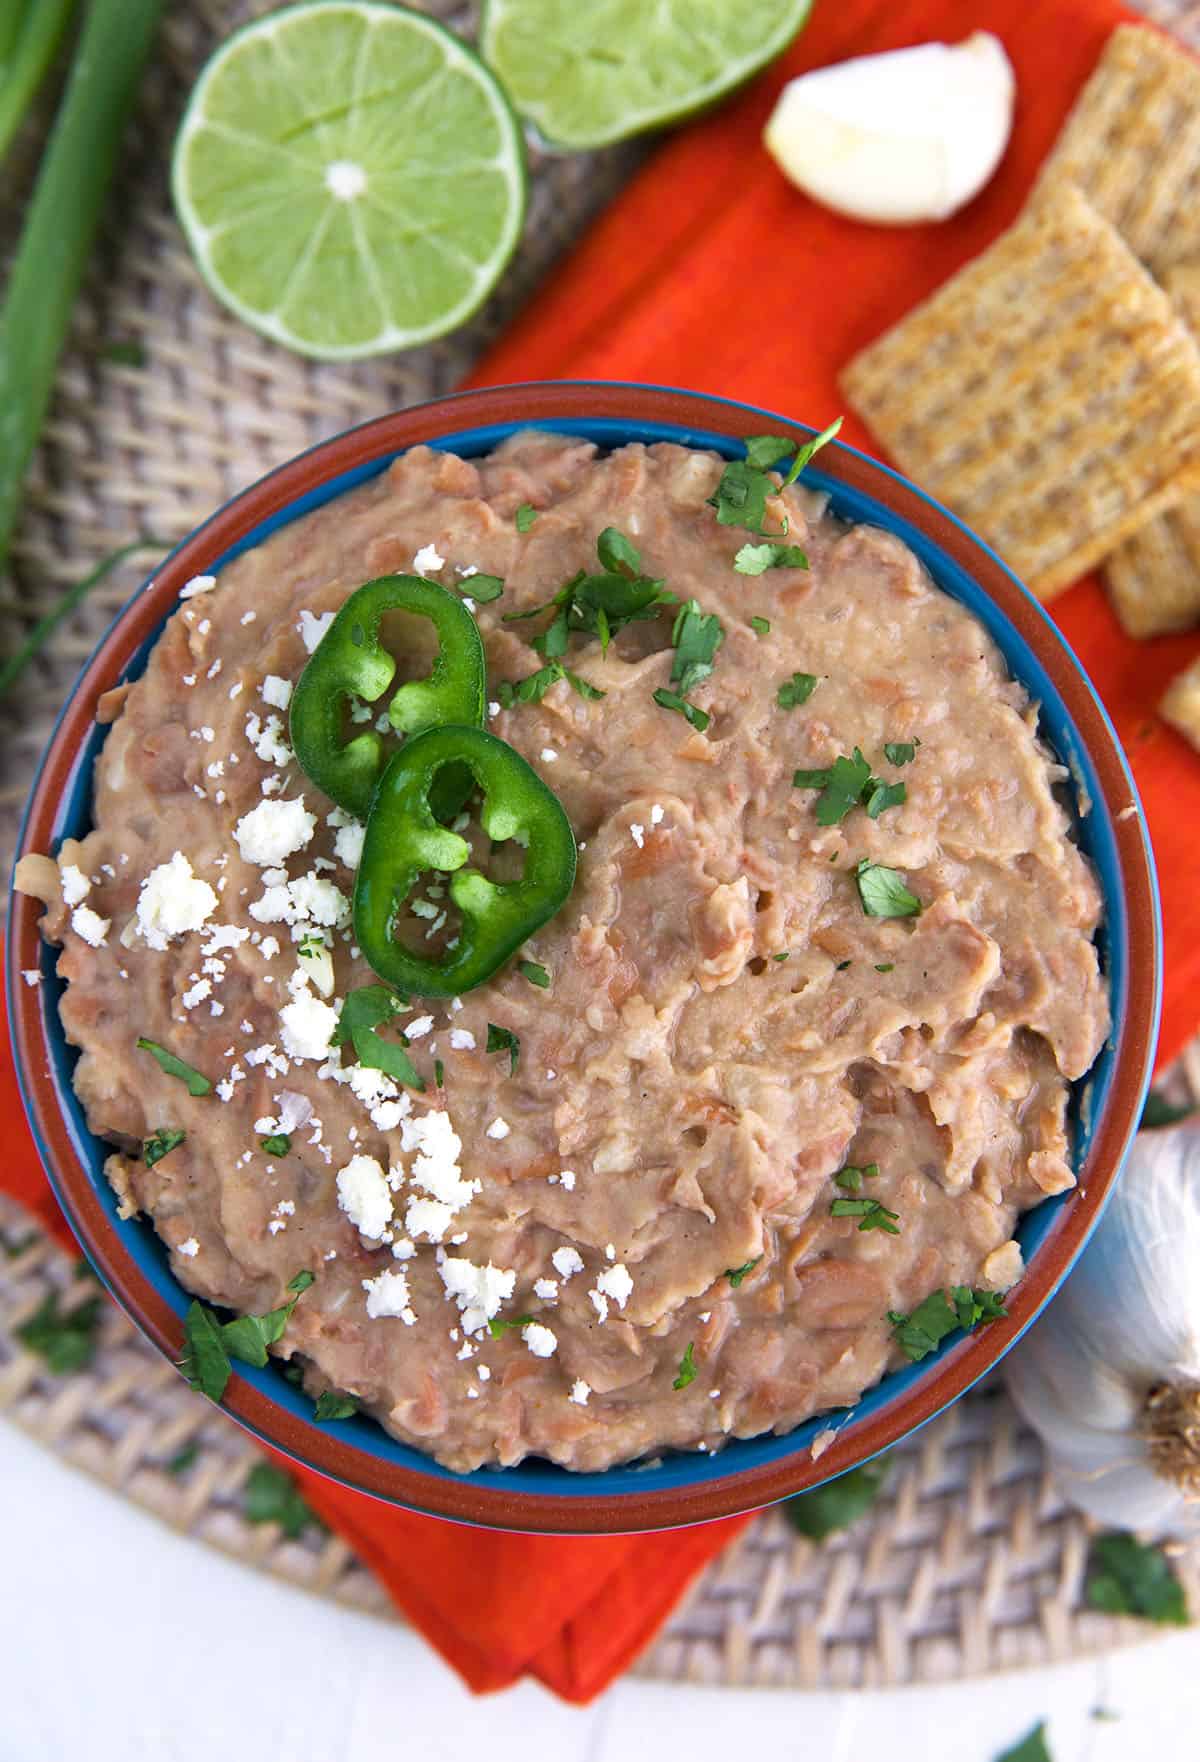 Cilantro, cheese and jalapenos garnish a bowl of refried beans.